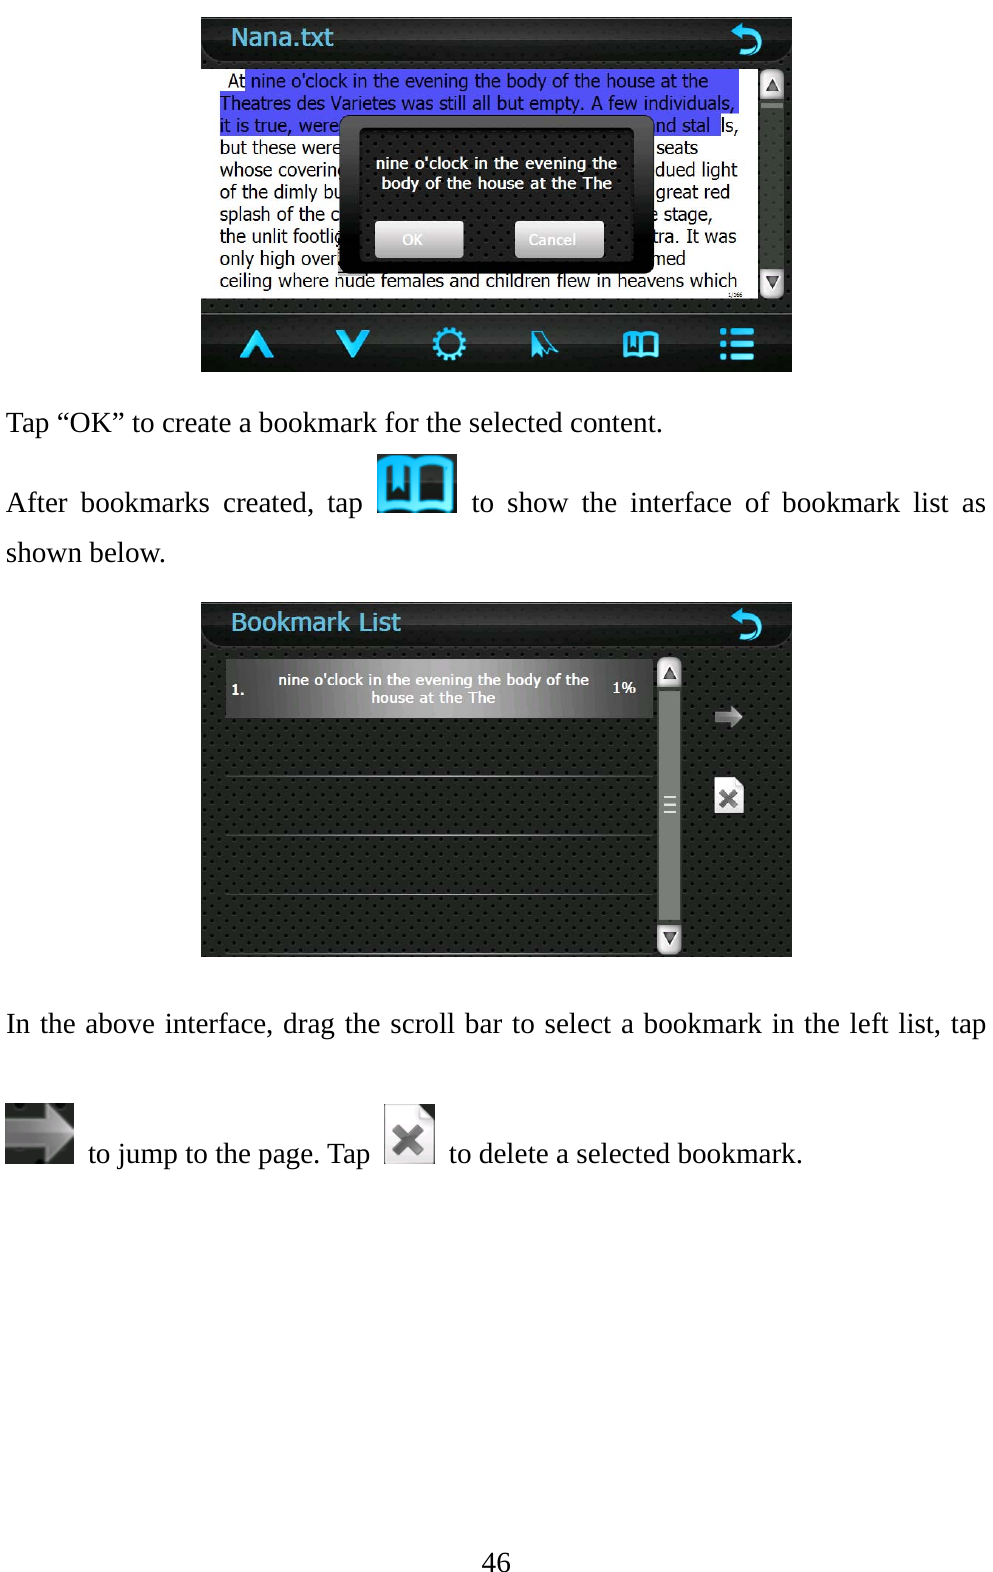  46  Tap “OK” to create a bookmark for the selected content. After bookmarks created, tap   to show the interface of bookmark list as shown below.  In the above interface, drag the scroll bar to select a bookmark in the left list, tap   to jump to the page. Tap    to delete a selected bookmark.